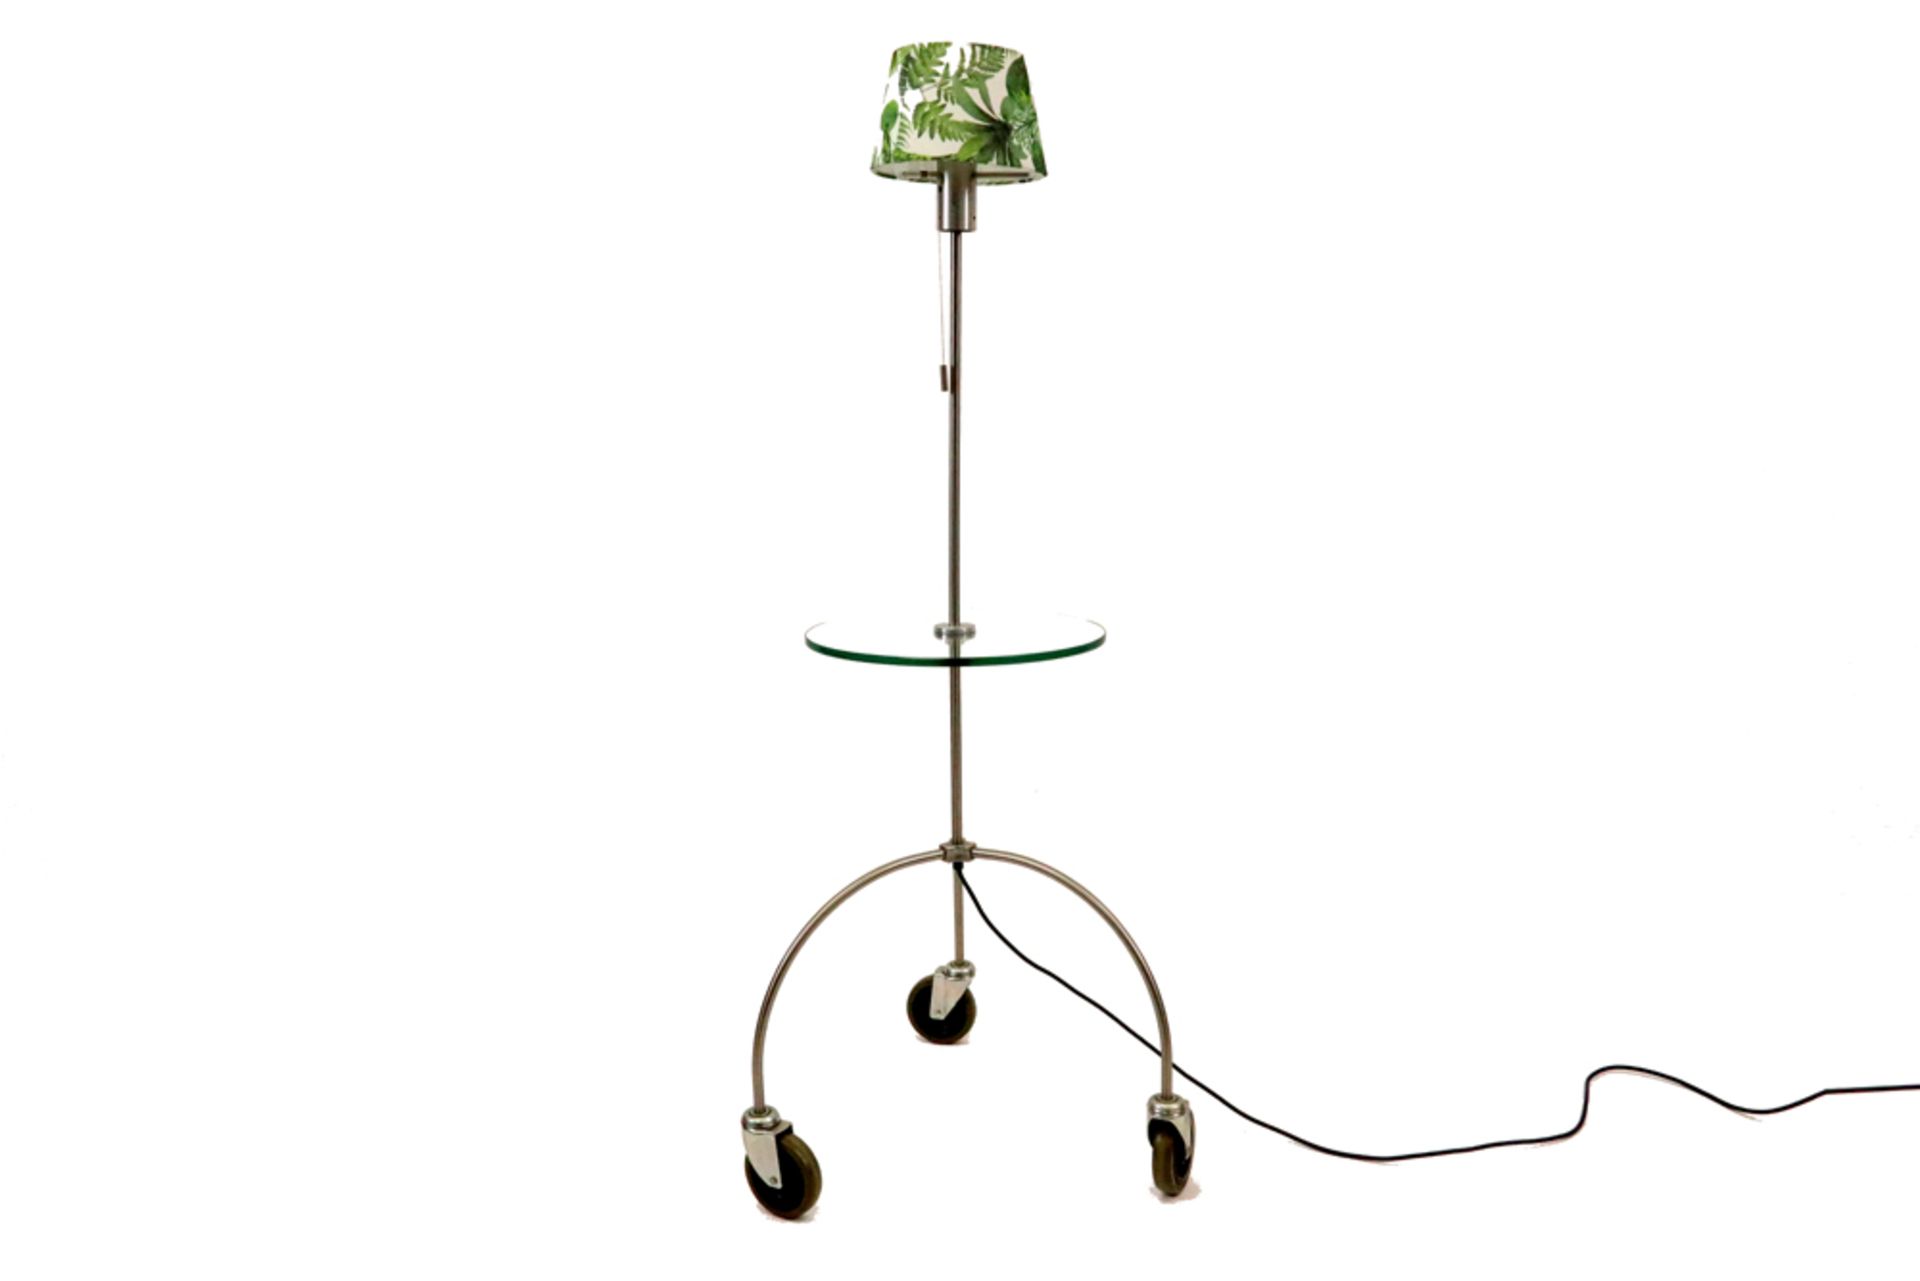 a Jan des Bouvrie design occasional table (with lamp)on wheels in glass and metal || JAN DES BOUVRIE